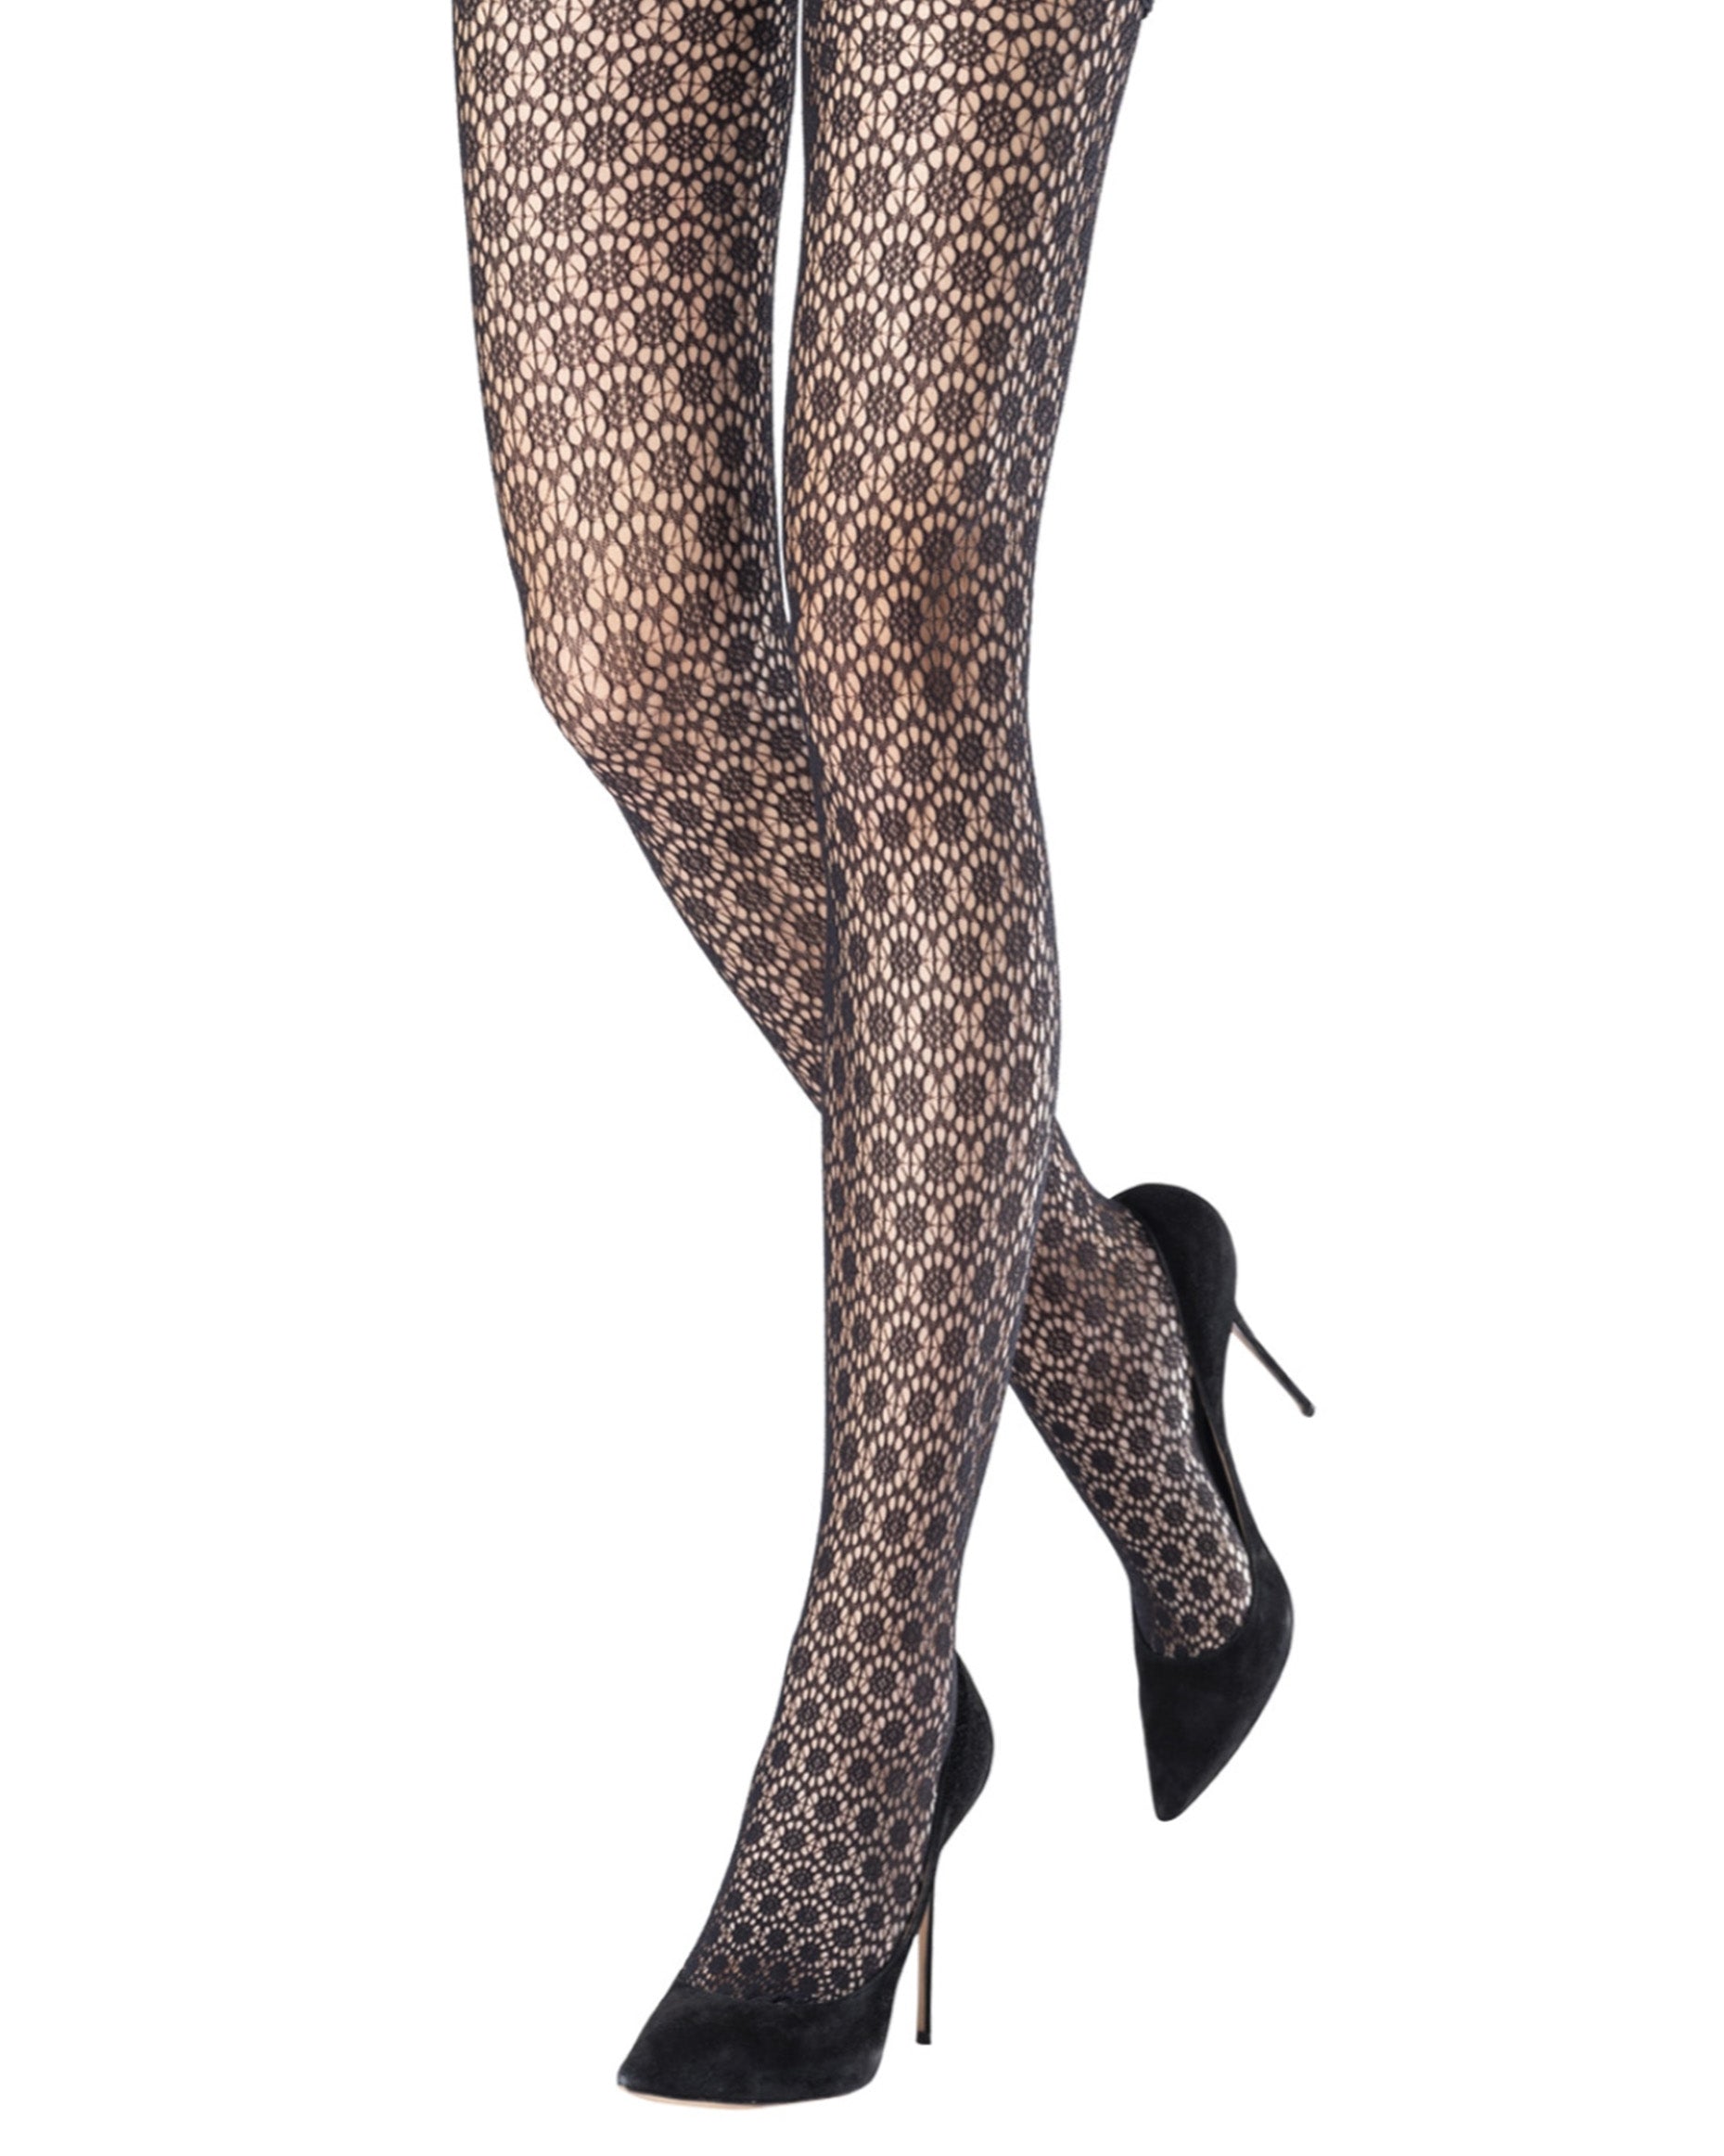 Emilio Cavallini Circle Lace Tights - Black openwork circular crochet style lace tights with reinforced toe and seamless body.